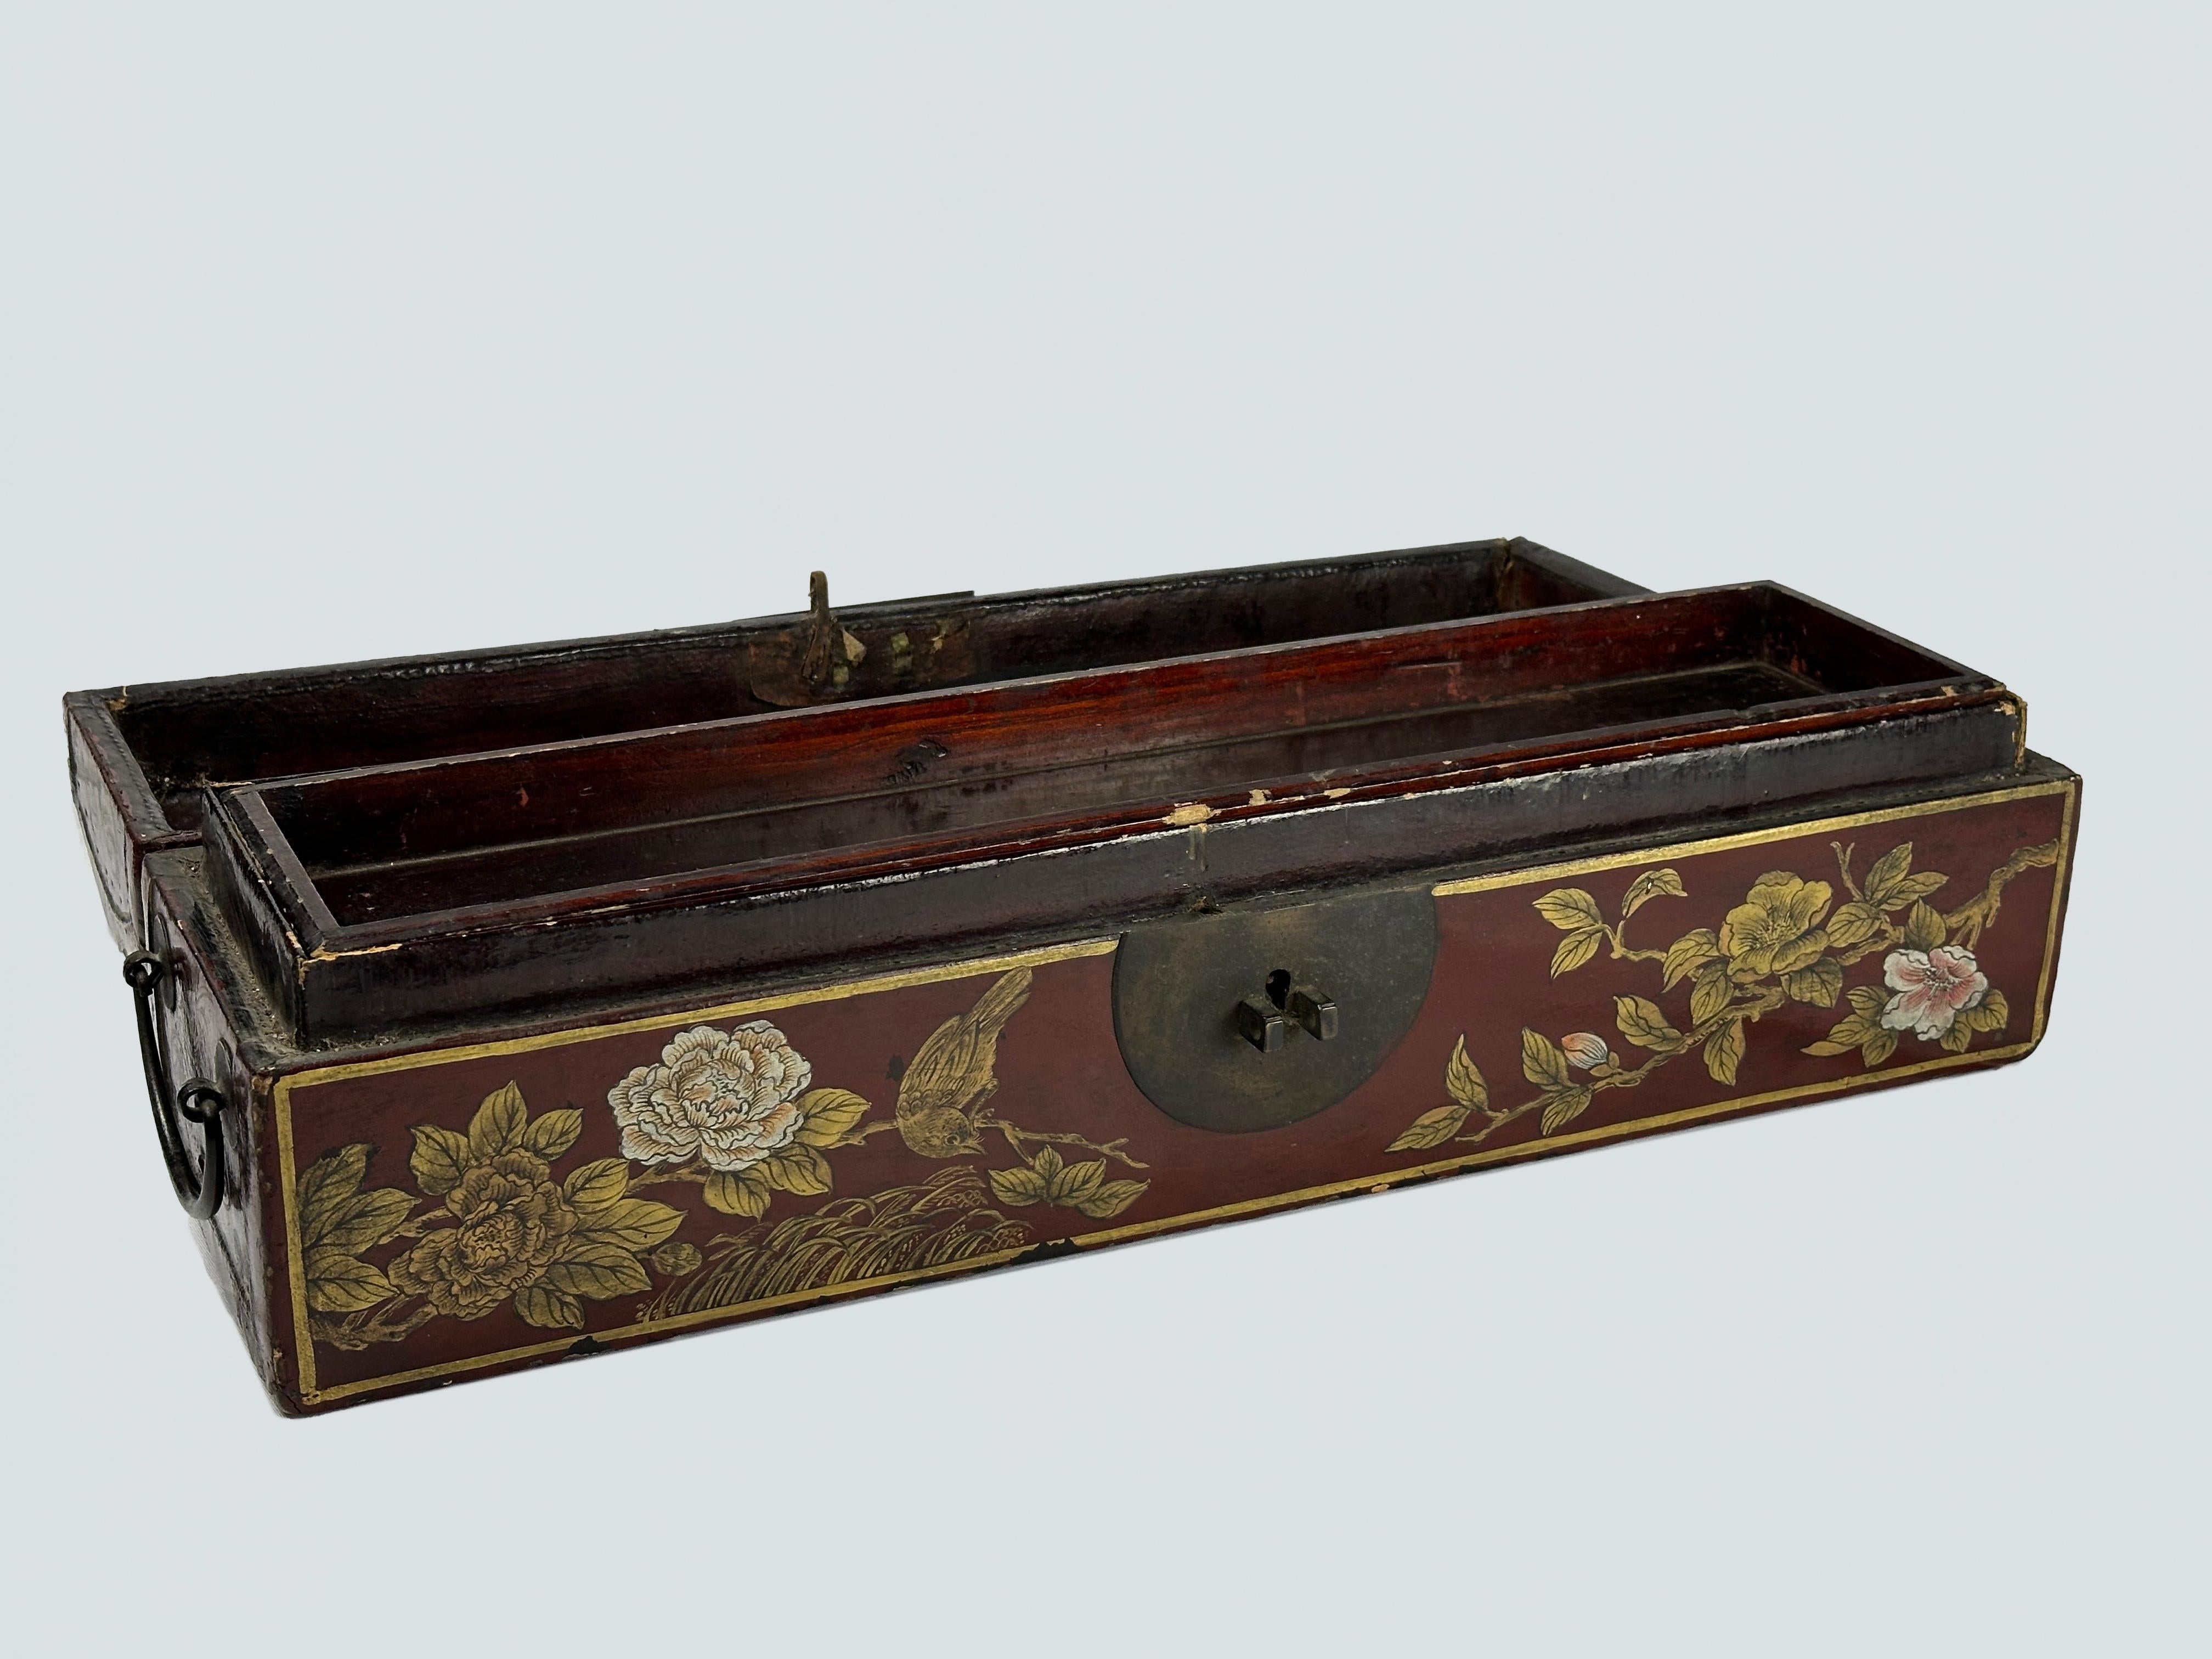 Chinese Jewelry Box

c. 19th century
Handpainted wood, metal escutcheon and hardware
6.25 x 6 x 22 inches

Hinges work, lidded box is functional and in excellent condition




